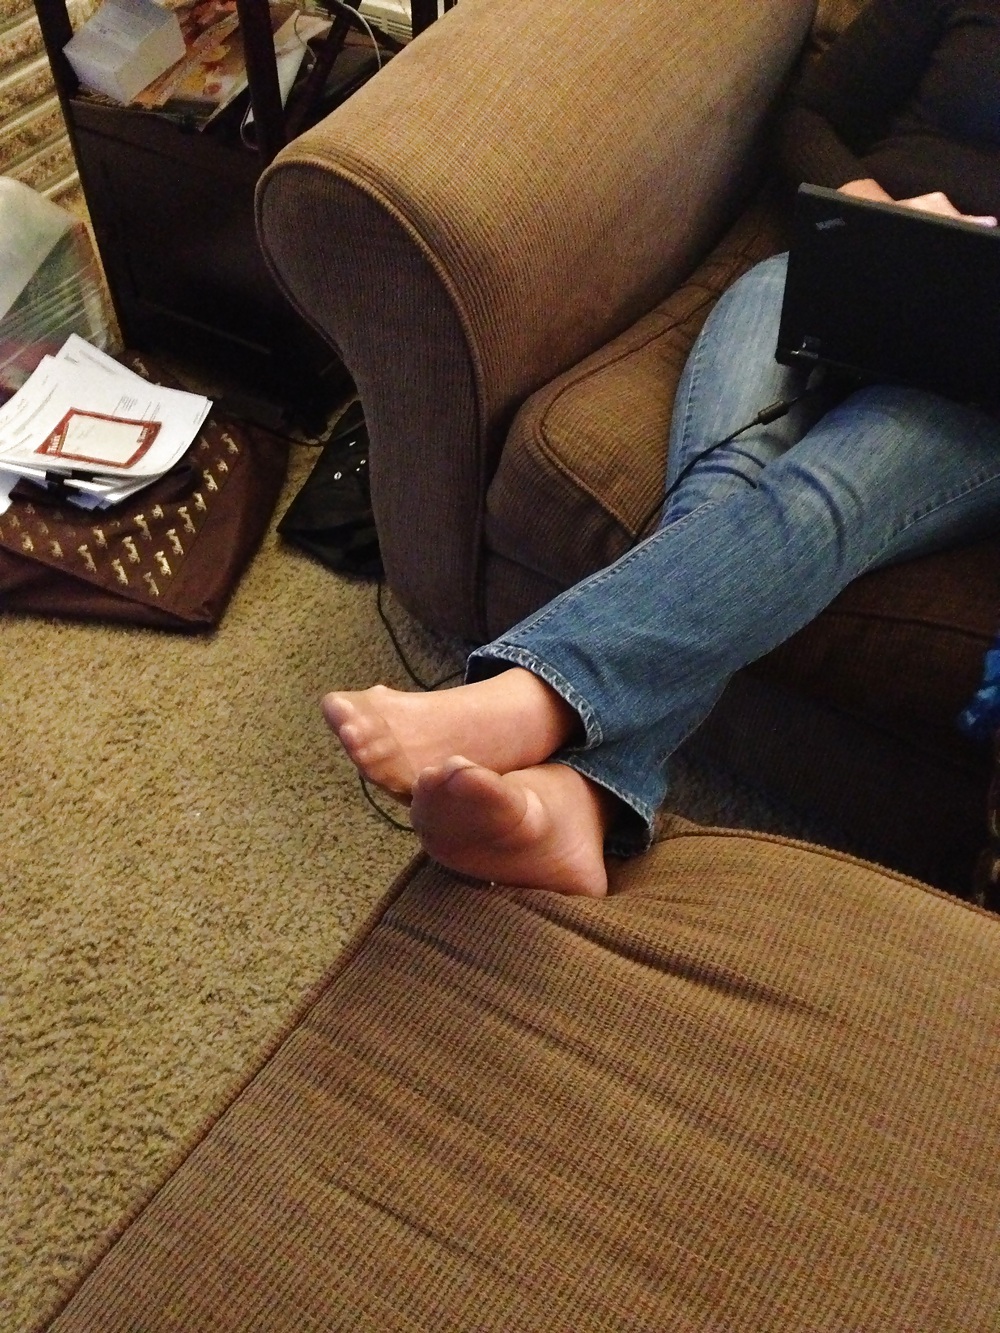 More candids of my pantyhose feet and toes. #22749793